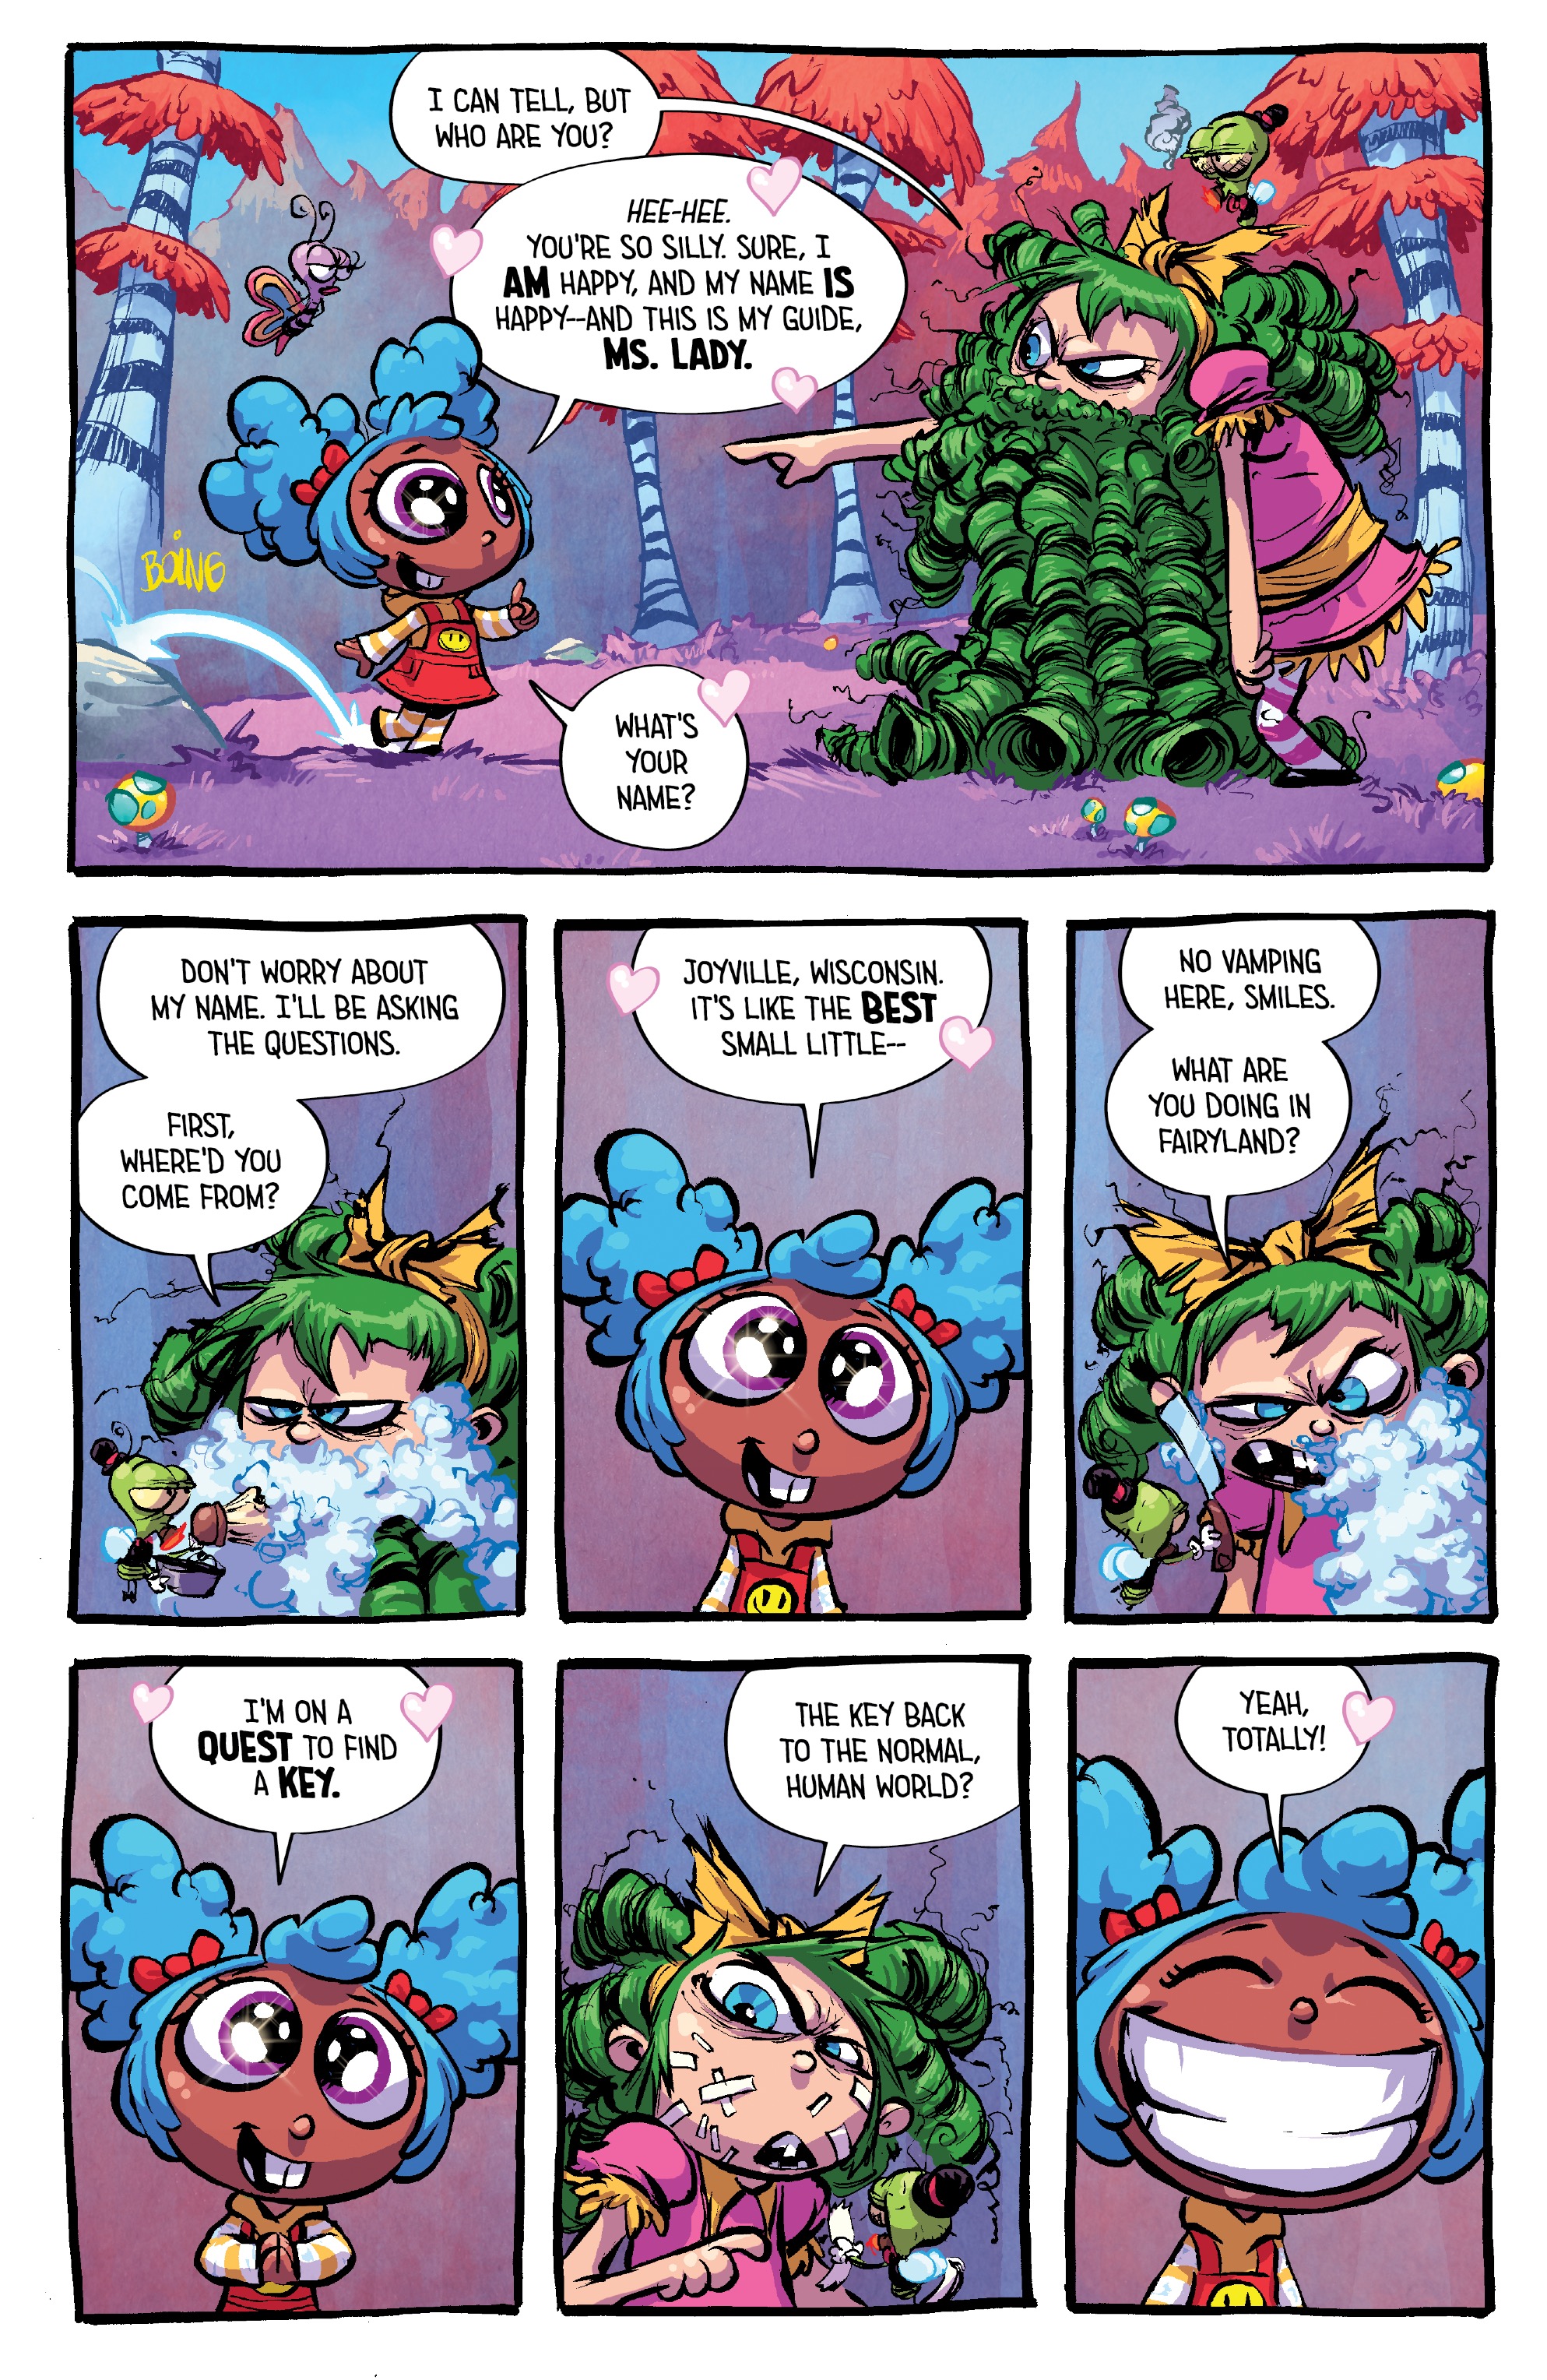 I Hate Fairyland (2015) Chapter 3 Page 9